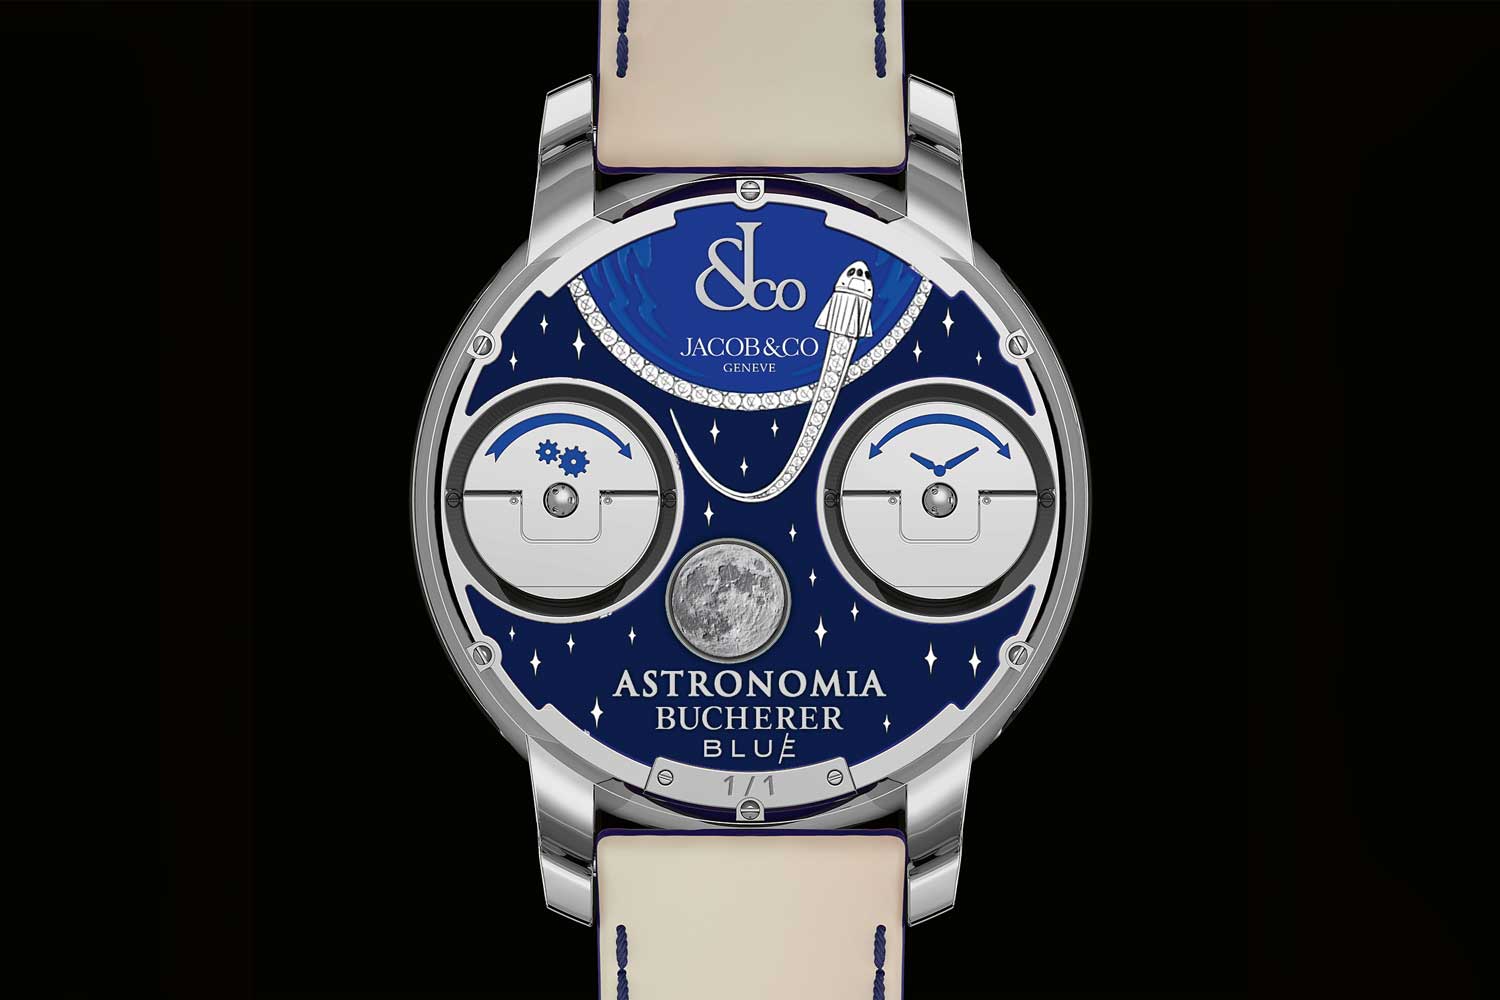 The watch’s custom caseback with a design of the Moon, stars and a spaceship traveling toward the International Space Station while orbiting the Earth